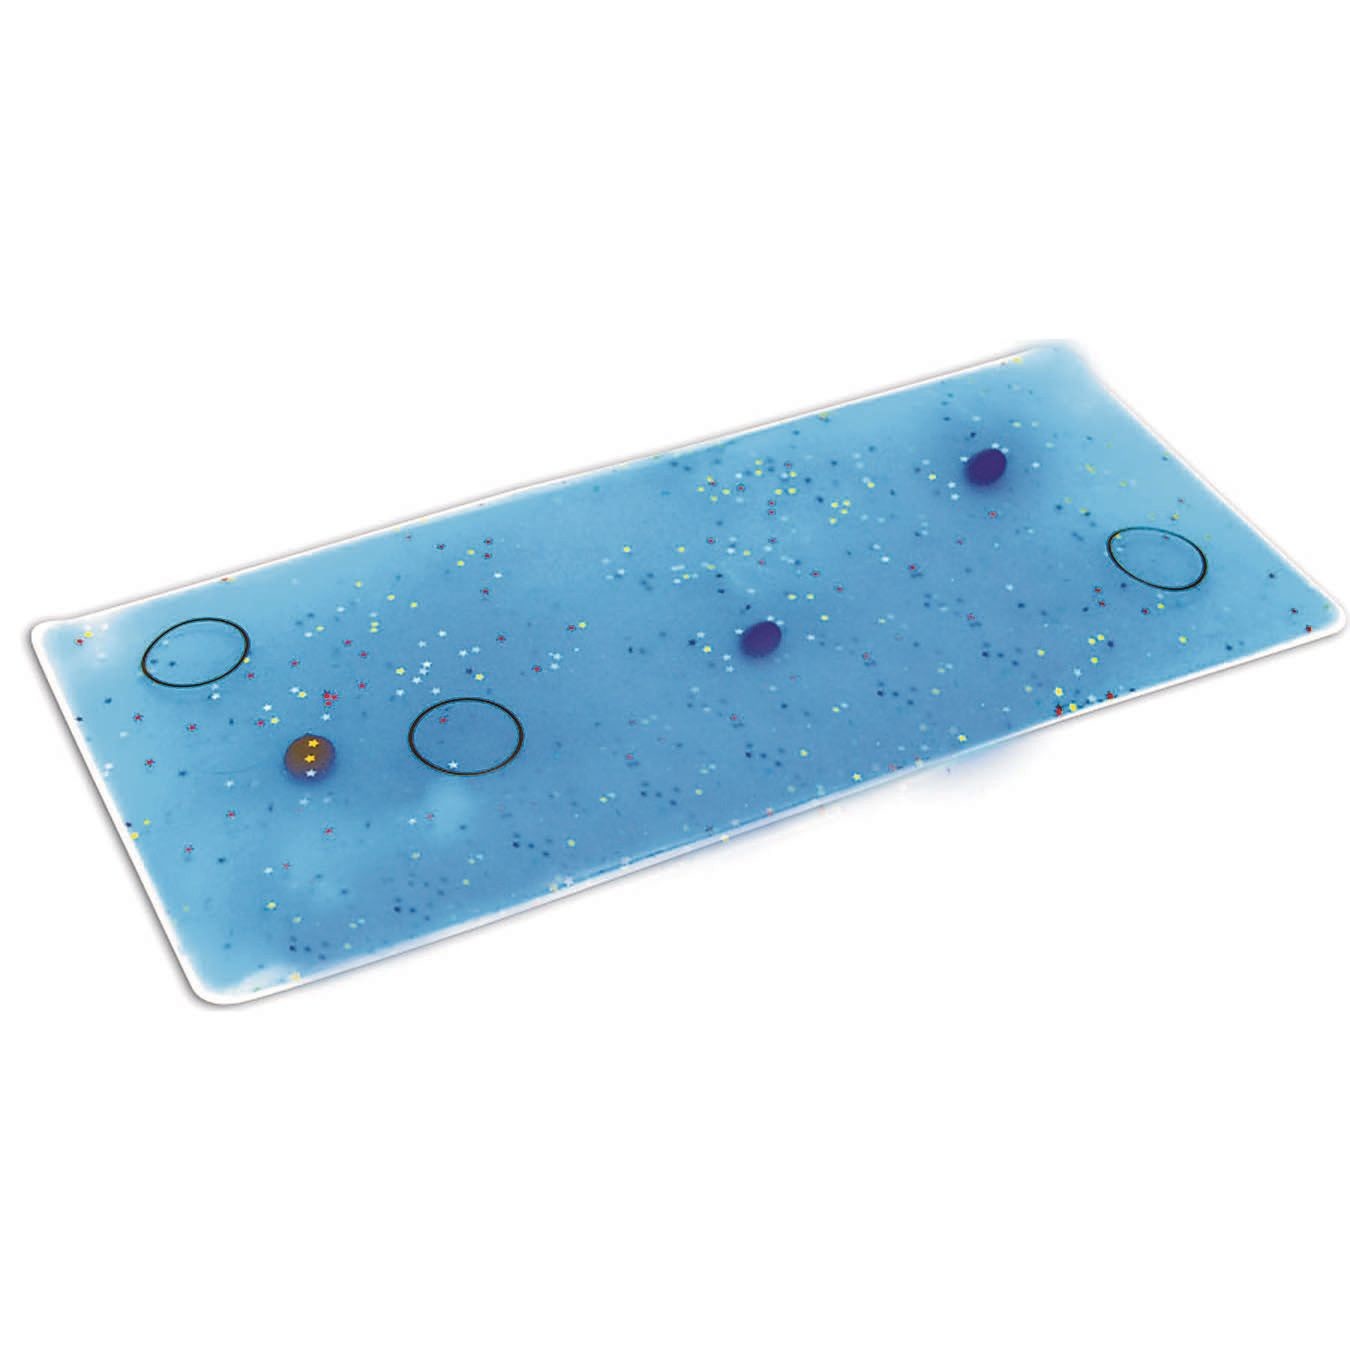 Stimulation Sensory Pad Buy Gel Worldwide S&S Marbles with at